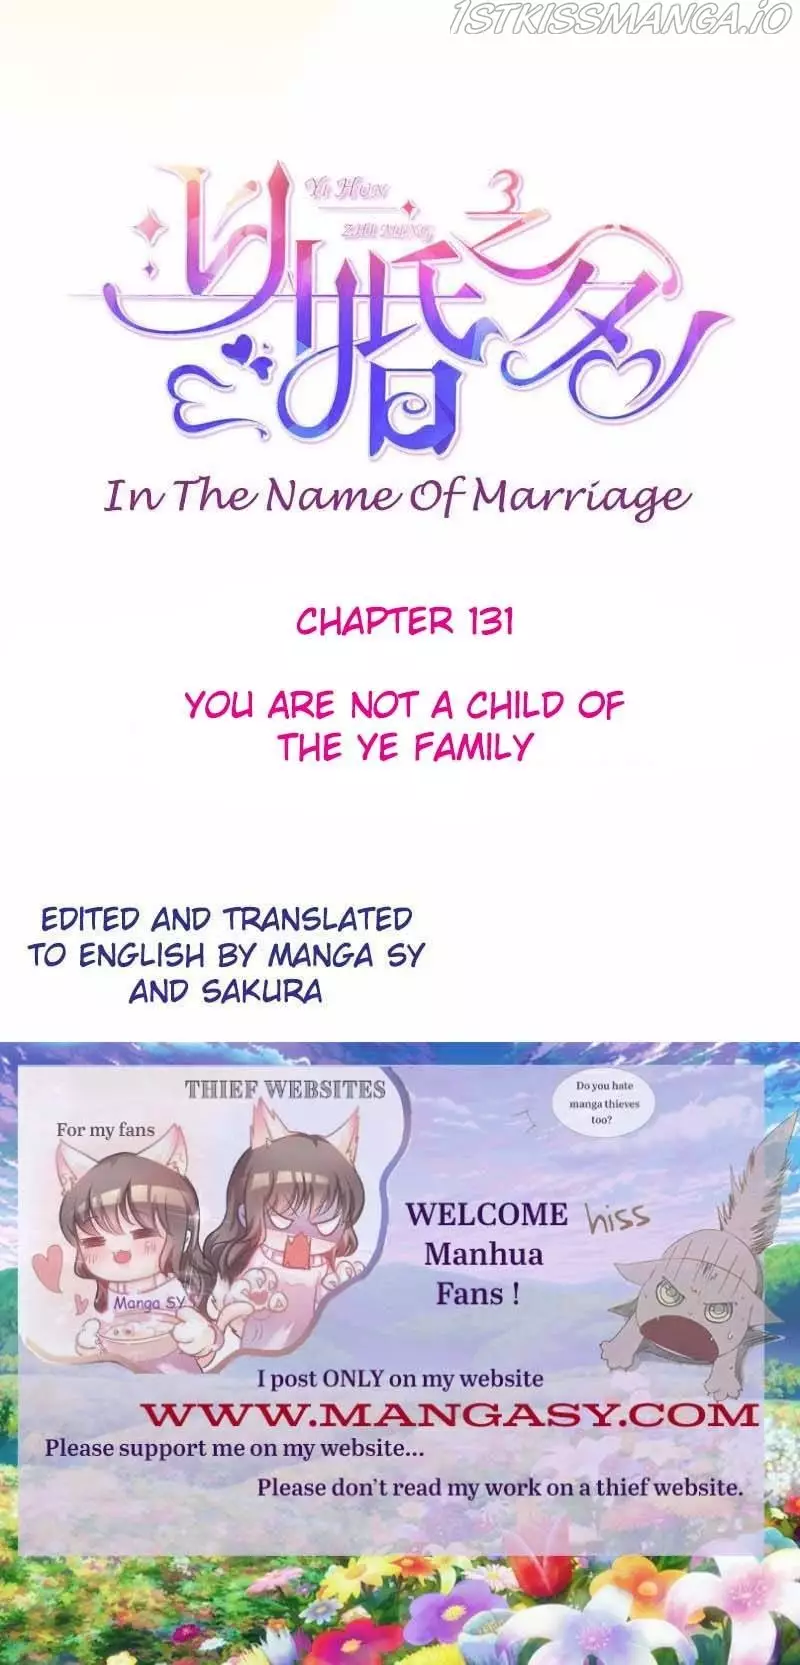 In The Name Of Marriage - 131 page 1-5e44efd7